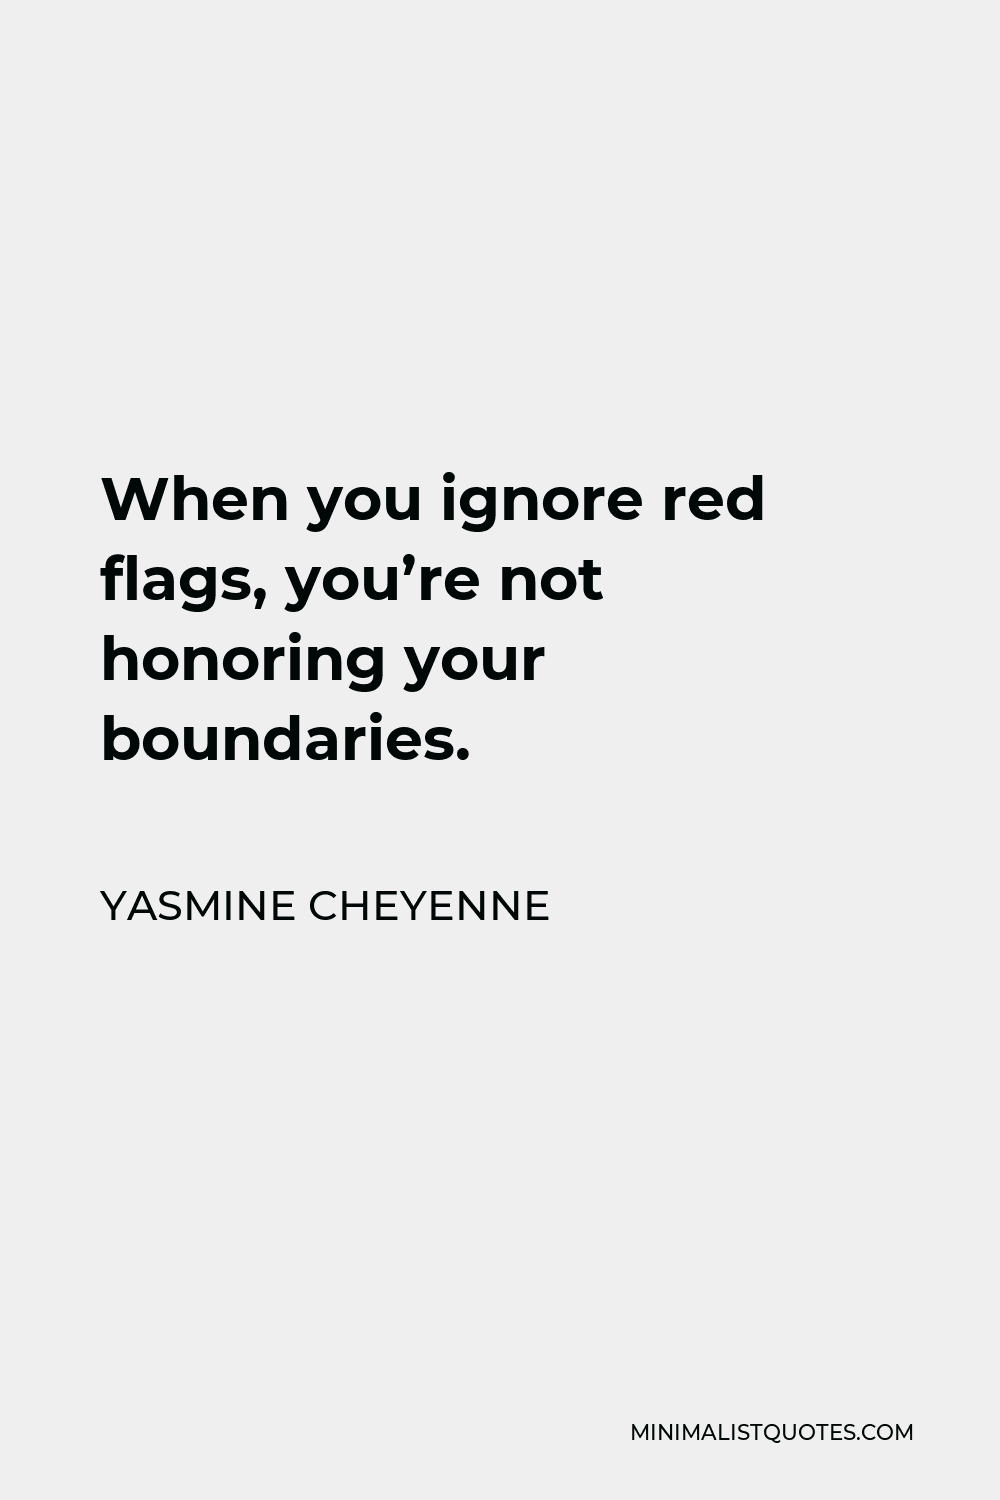 Yasmine Cheyenne Quote - When you ignore red flags, you’re not honoring your boundaries.